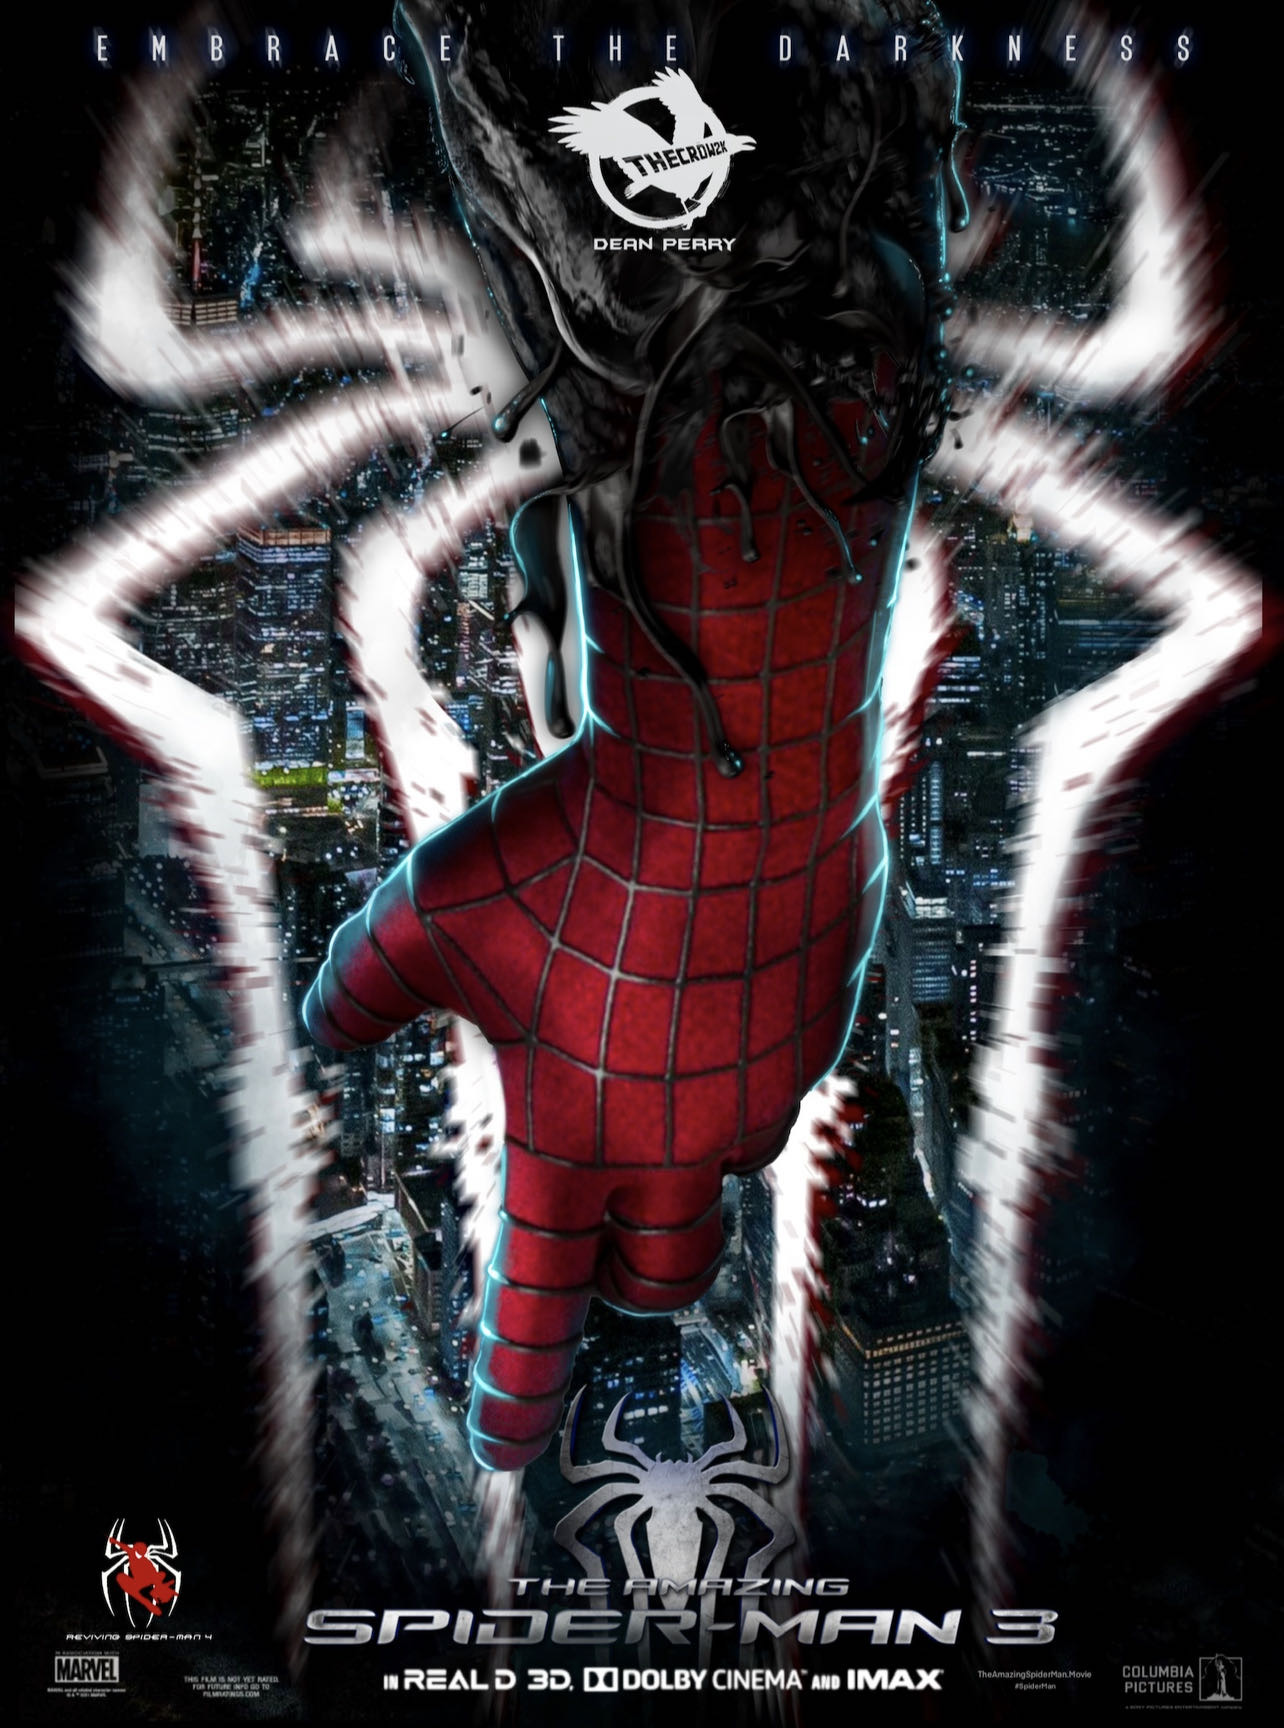 Spider-Man 4 Poster, Thecrow2k